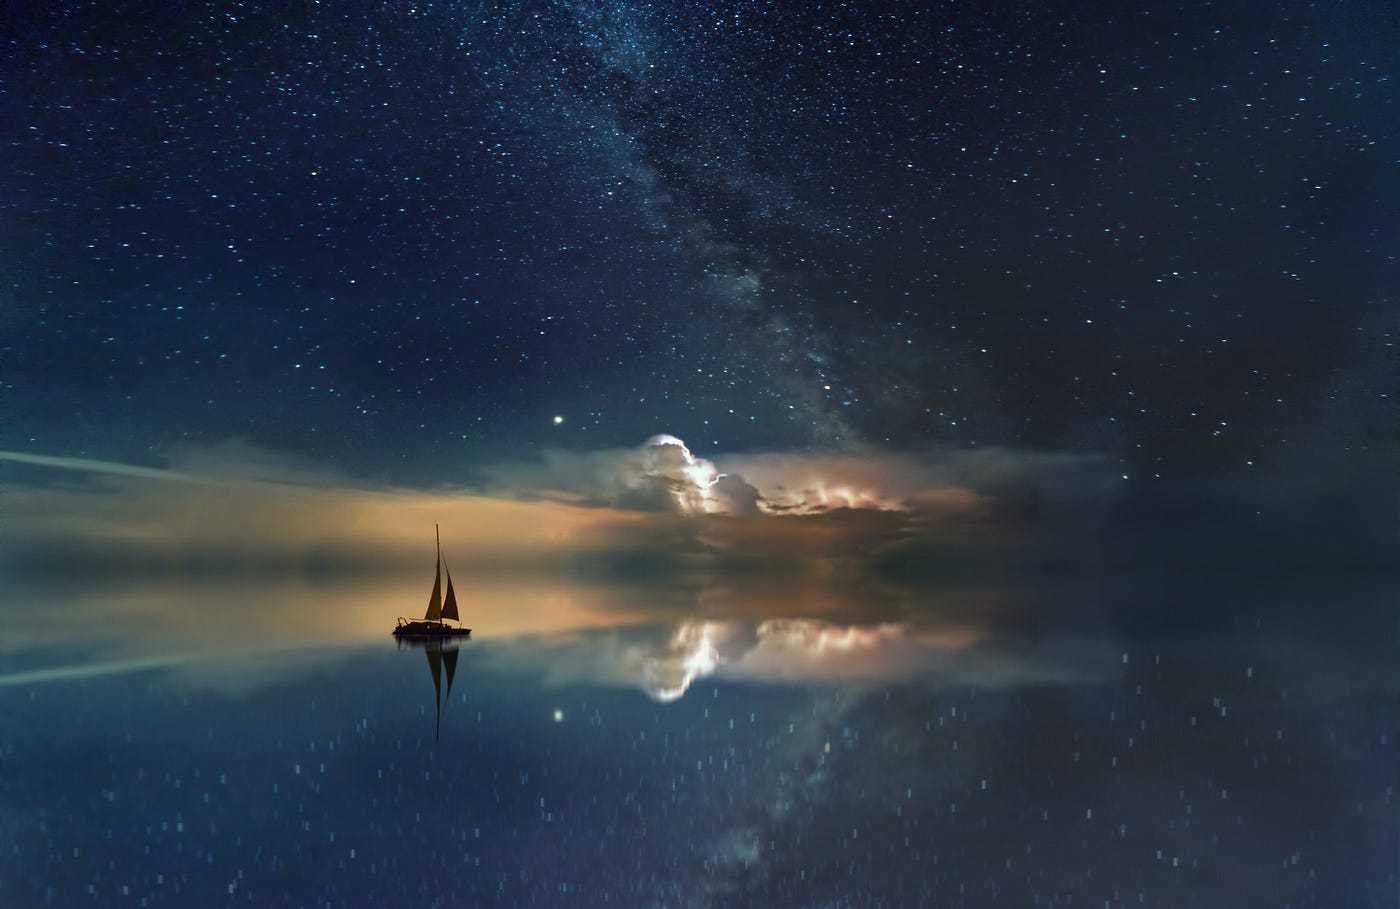 Star reflection boat on water